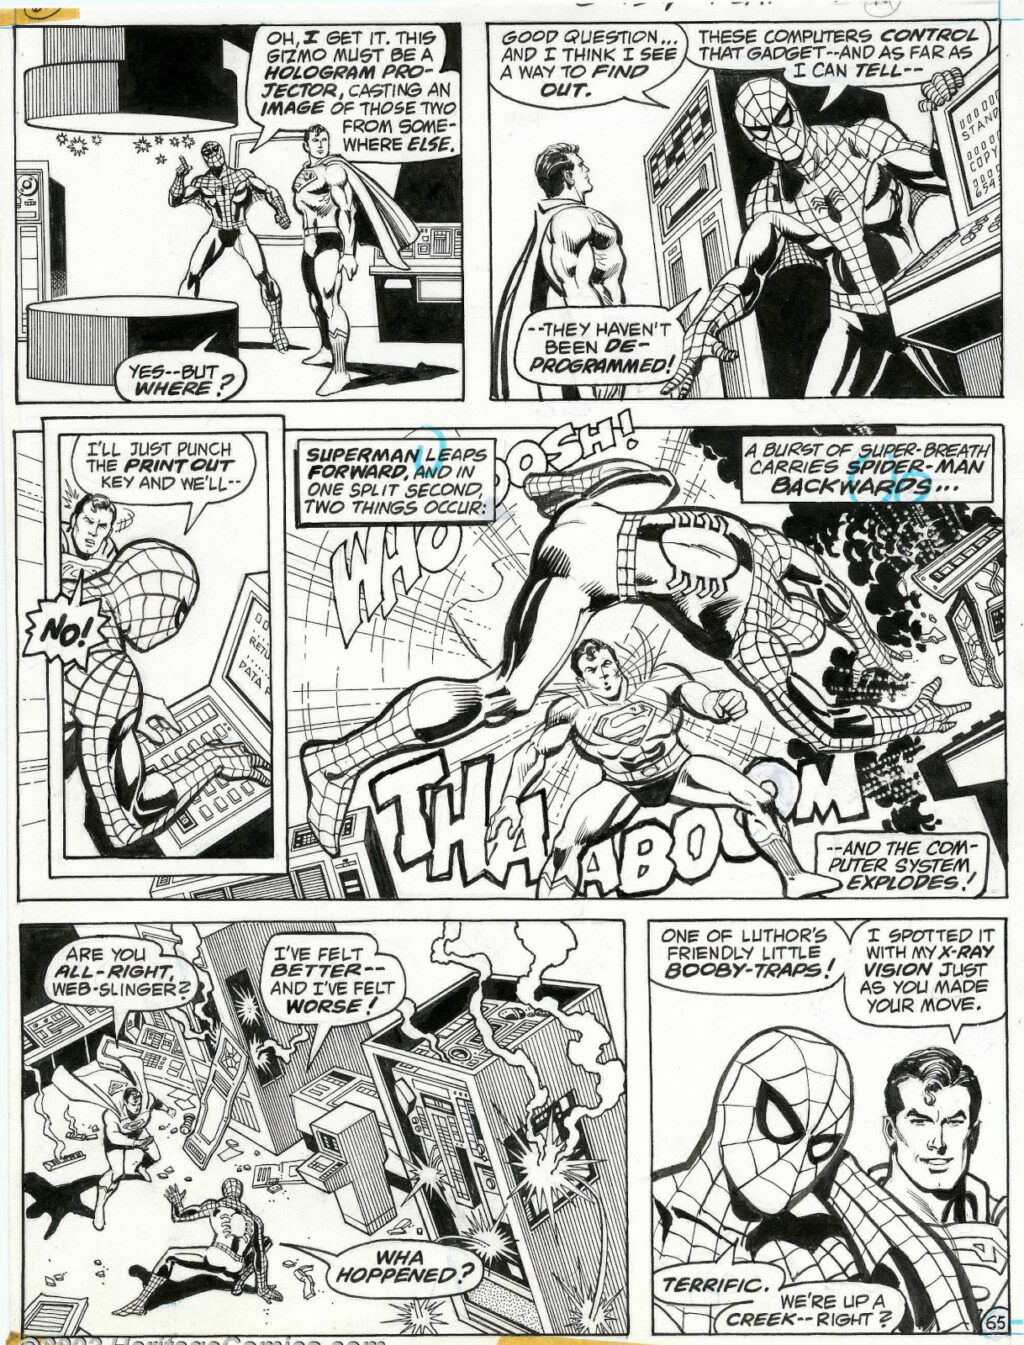 Superman vs. Spider Man page 65 by Ross Andru and Dick Giordano